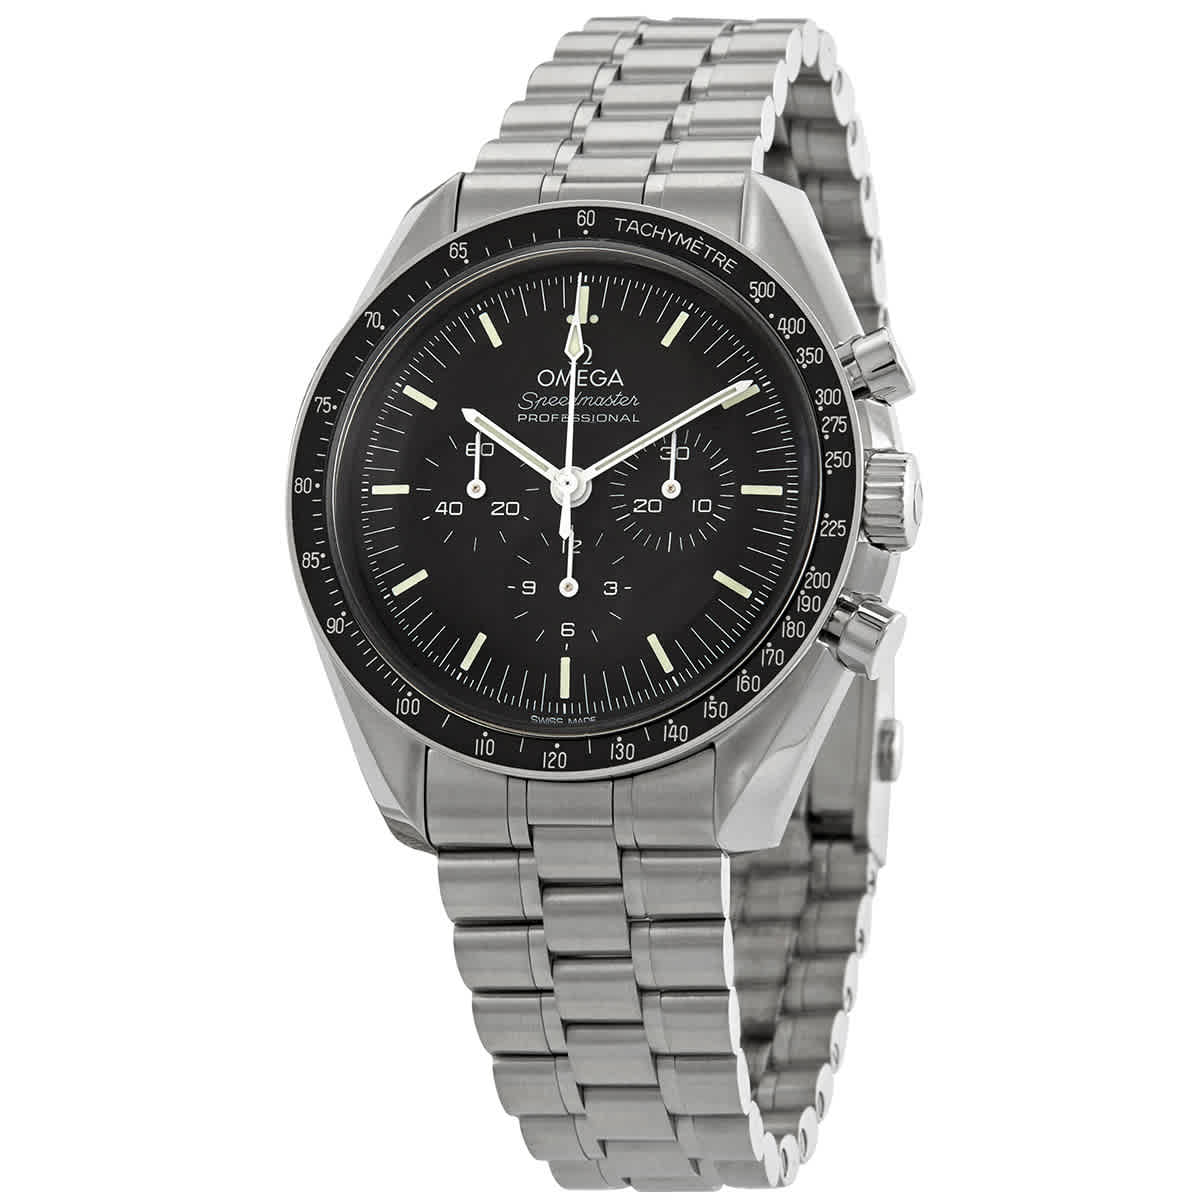 Omega Chronograph Hand Wind Watch 310.30.42.50.01.001 In Black